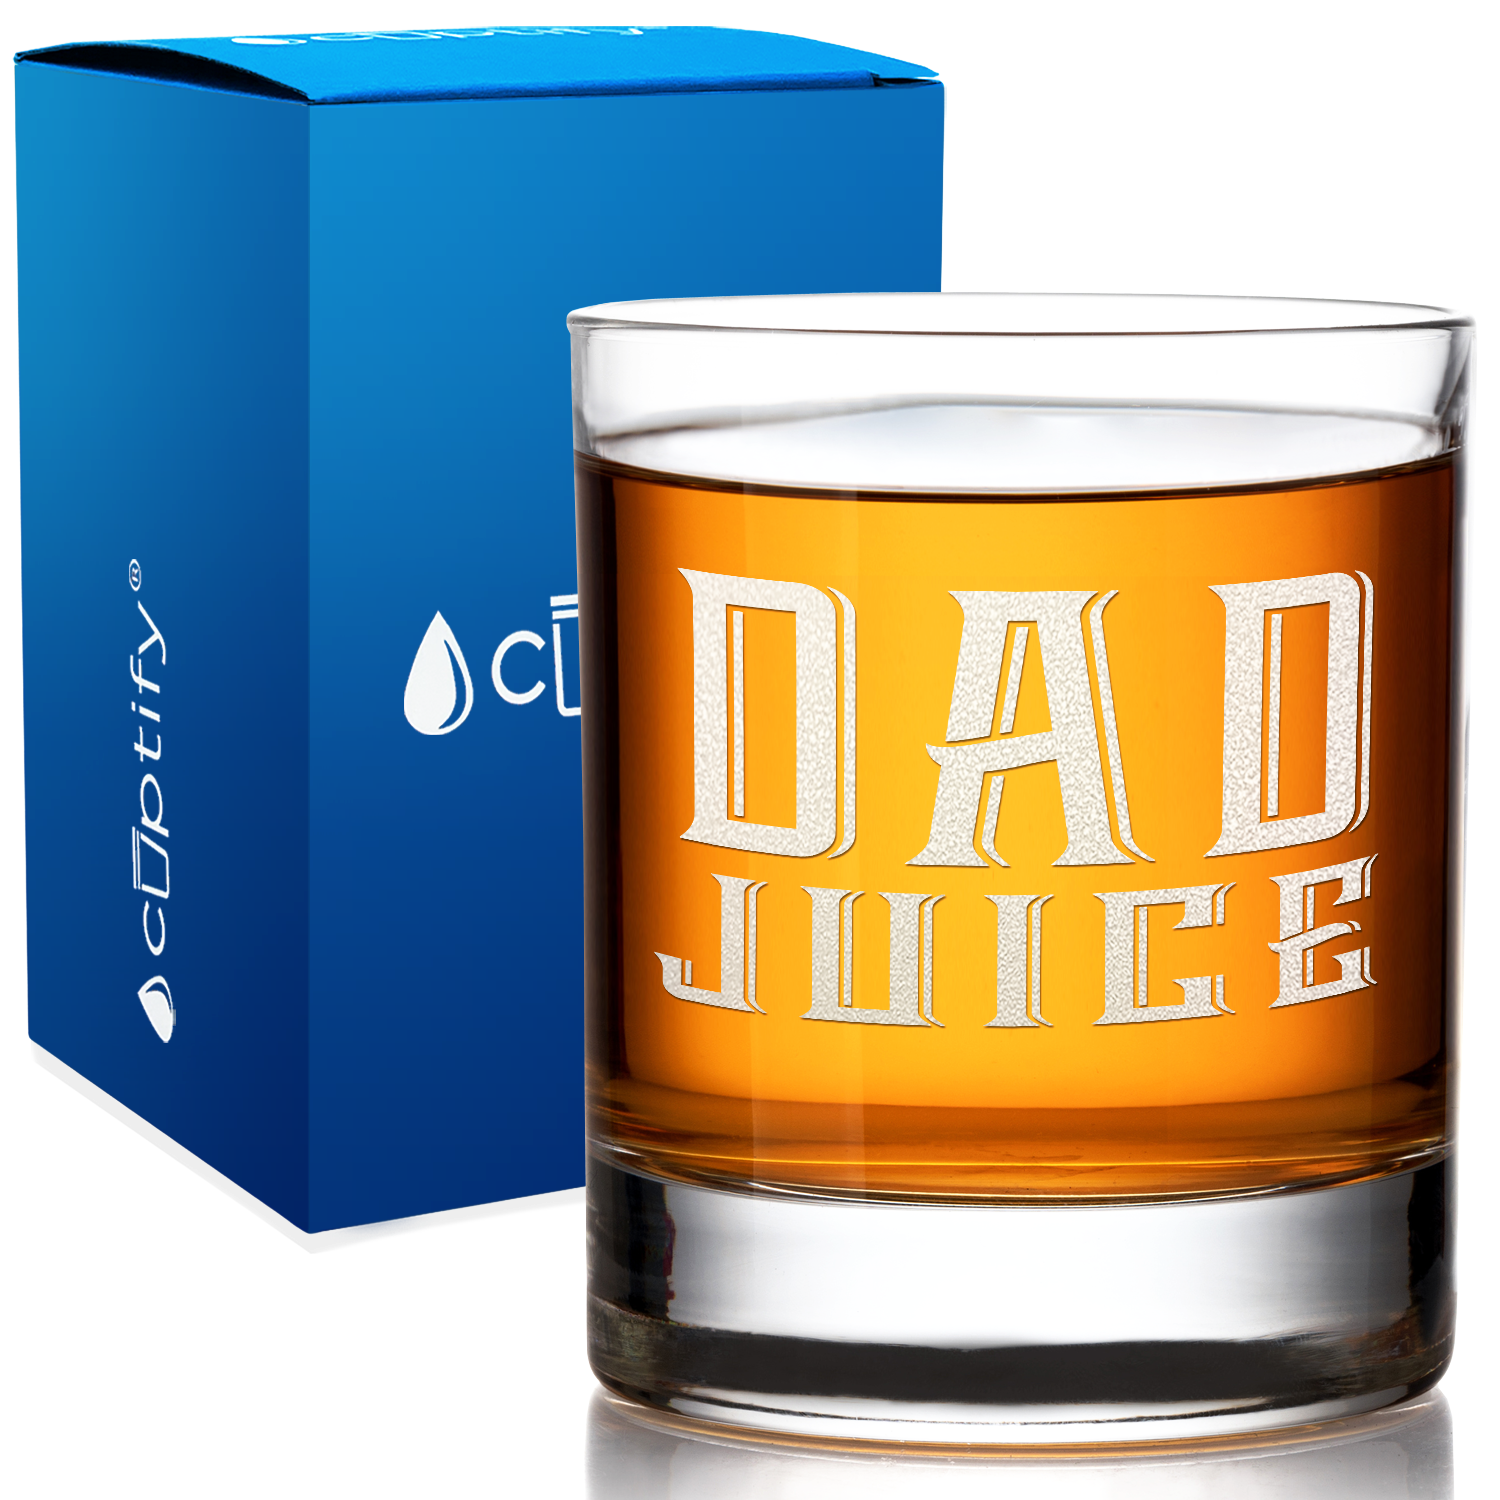 Dad Juice on 10.25oz Old Fashioned Glass